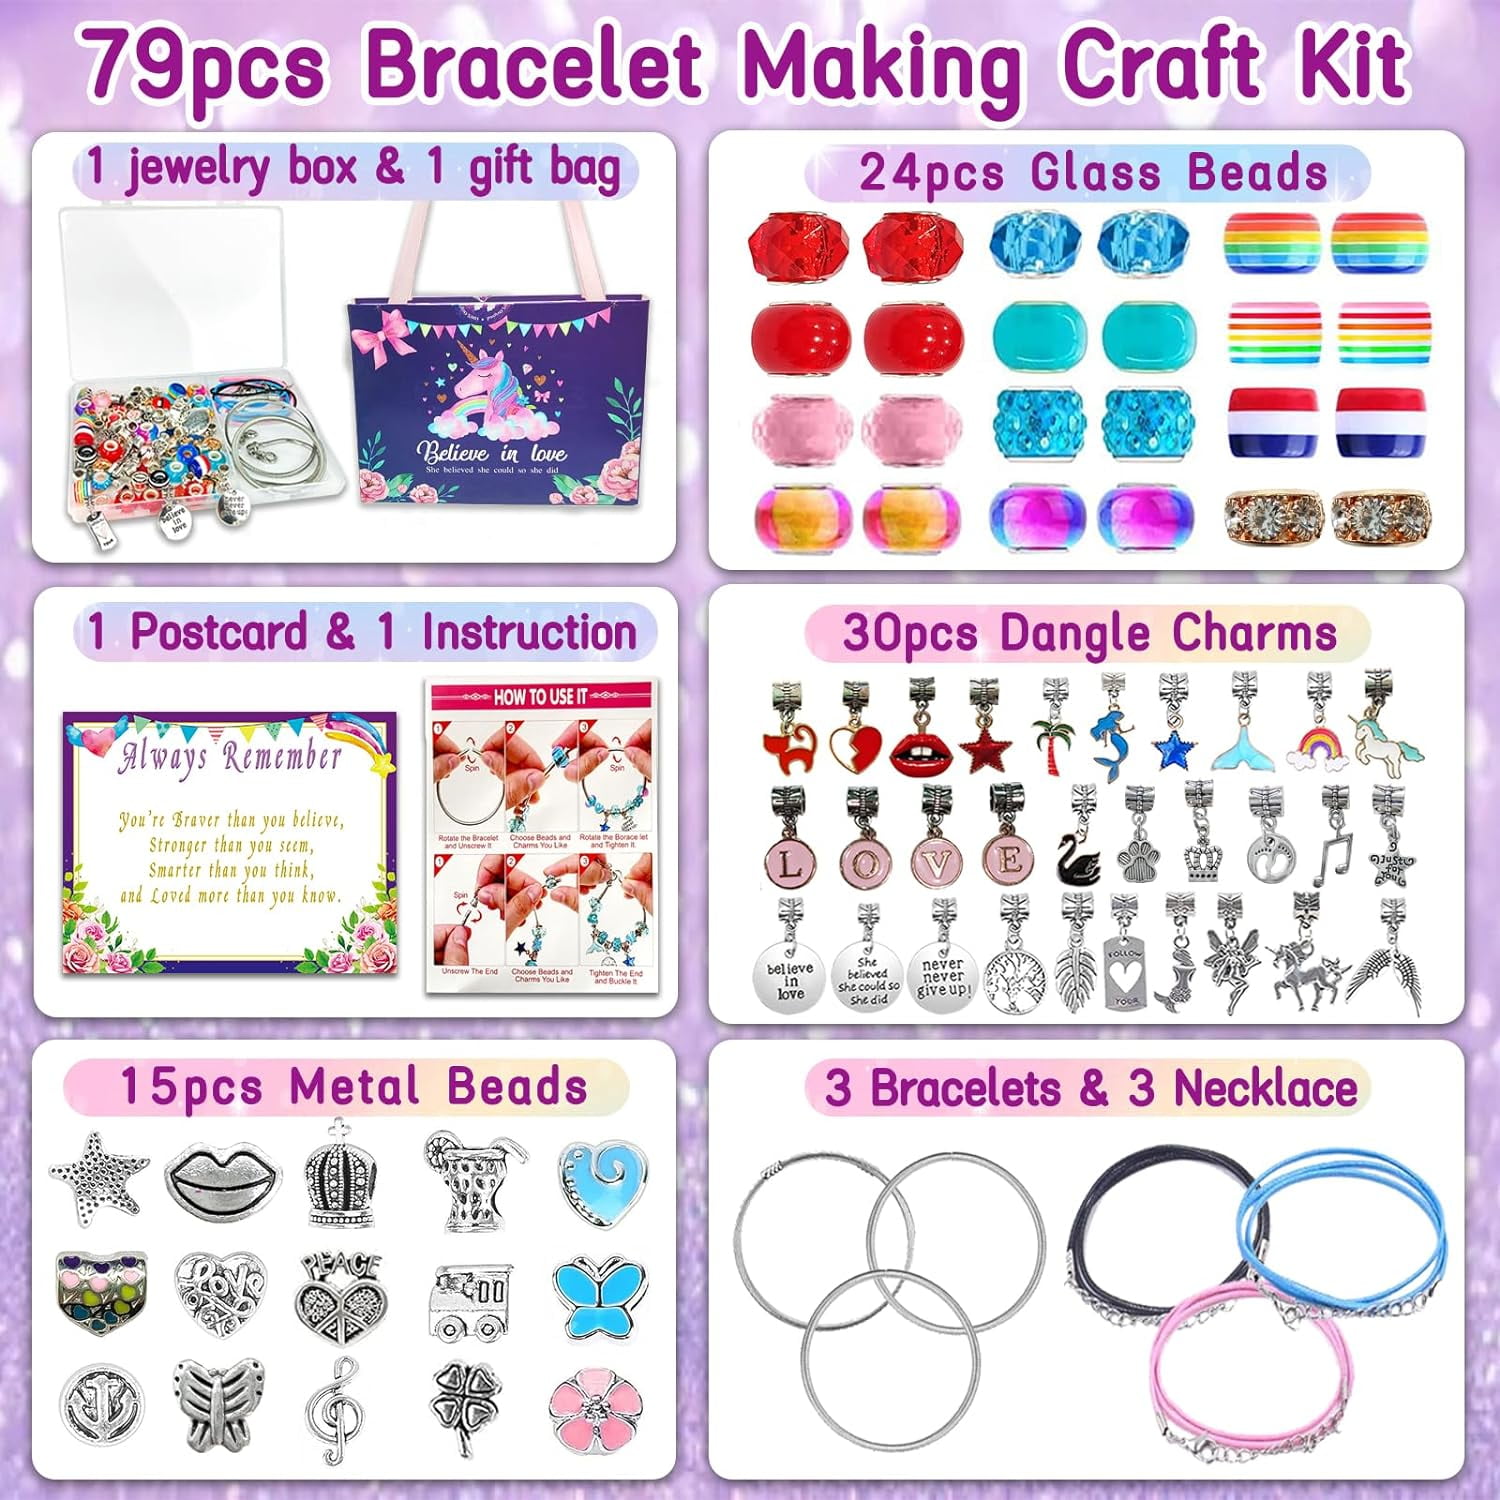 AIPRIDY Charm Bracelet Making Kit,Unicorn Mermaid Crafts Gifts Set Can  Inspires Imagination and Creativity,Jewelry Making Kit Perfect Gifts for  Girls